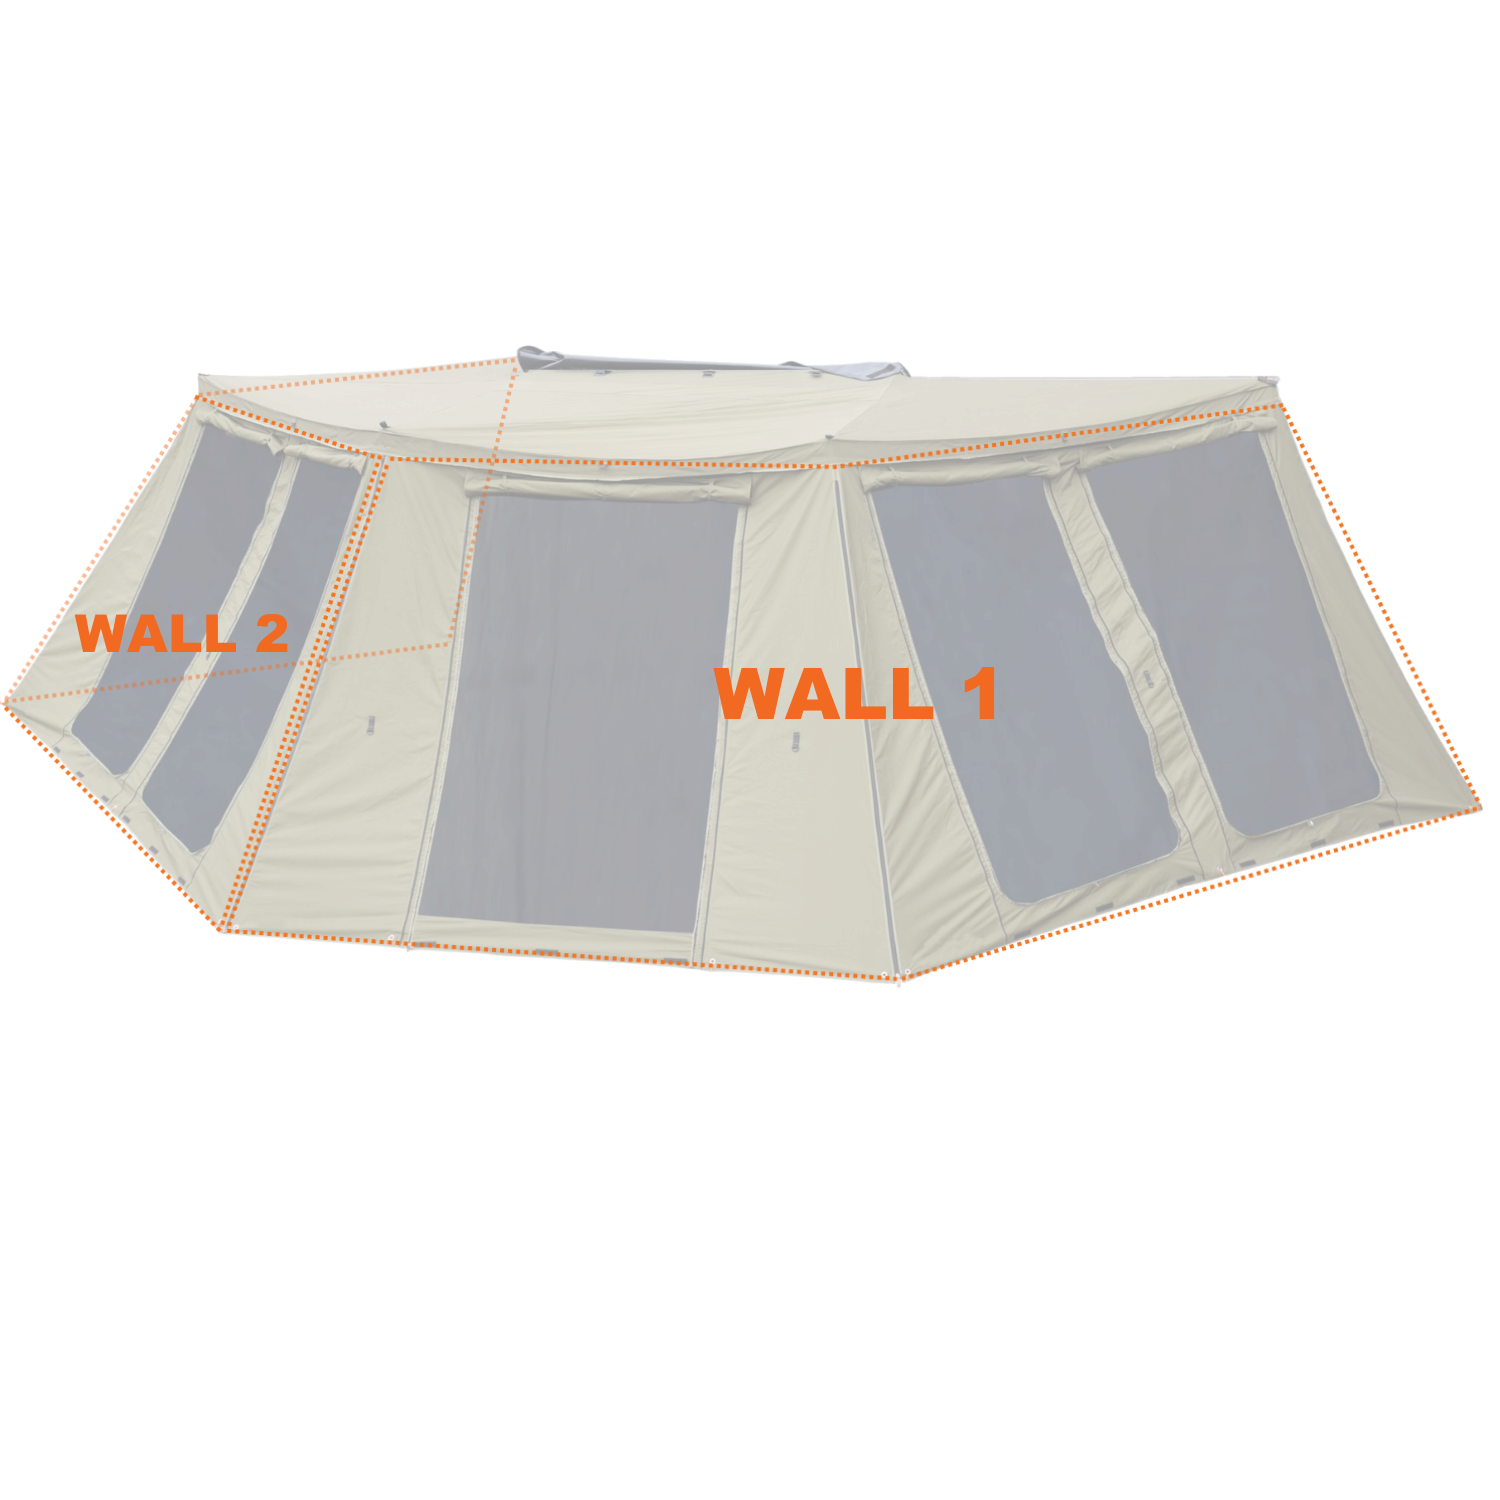 23Zero Deluxe Awning Wall